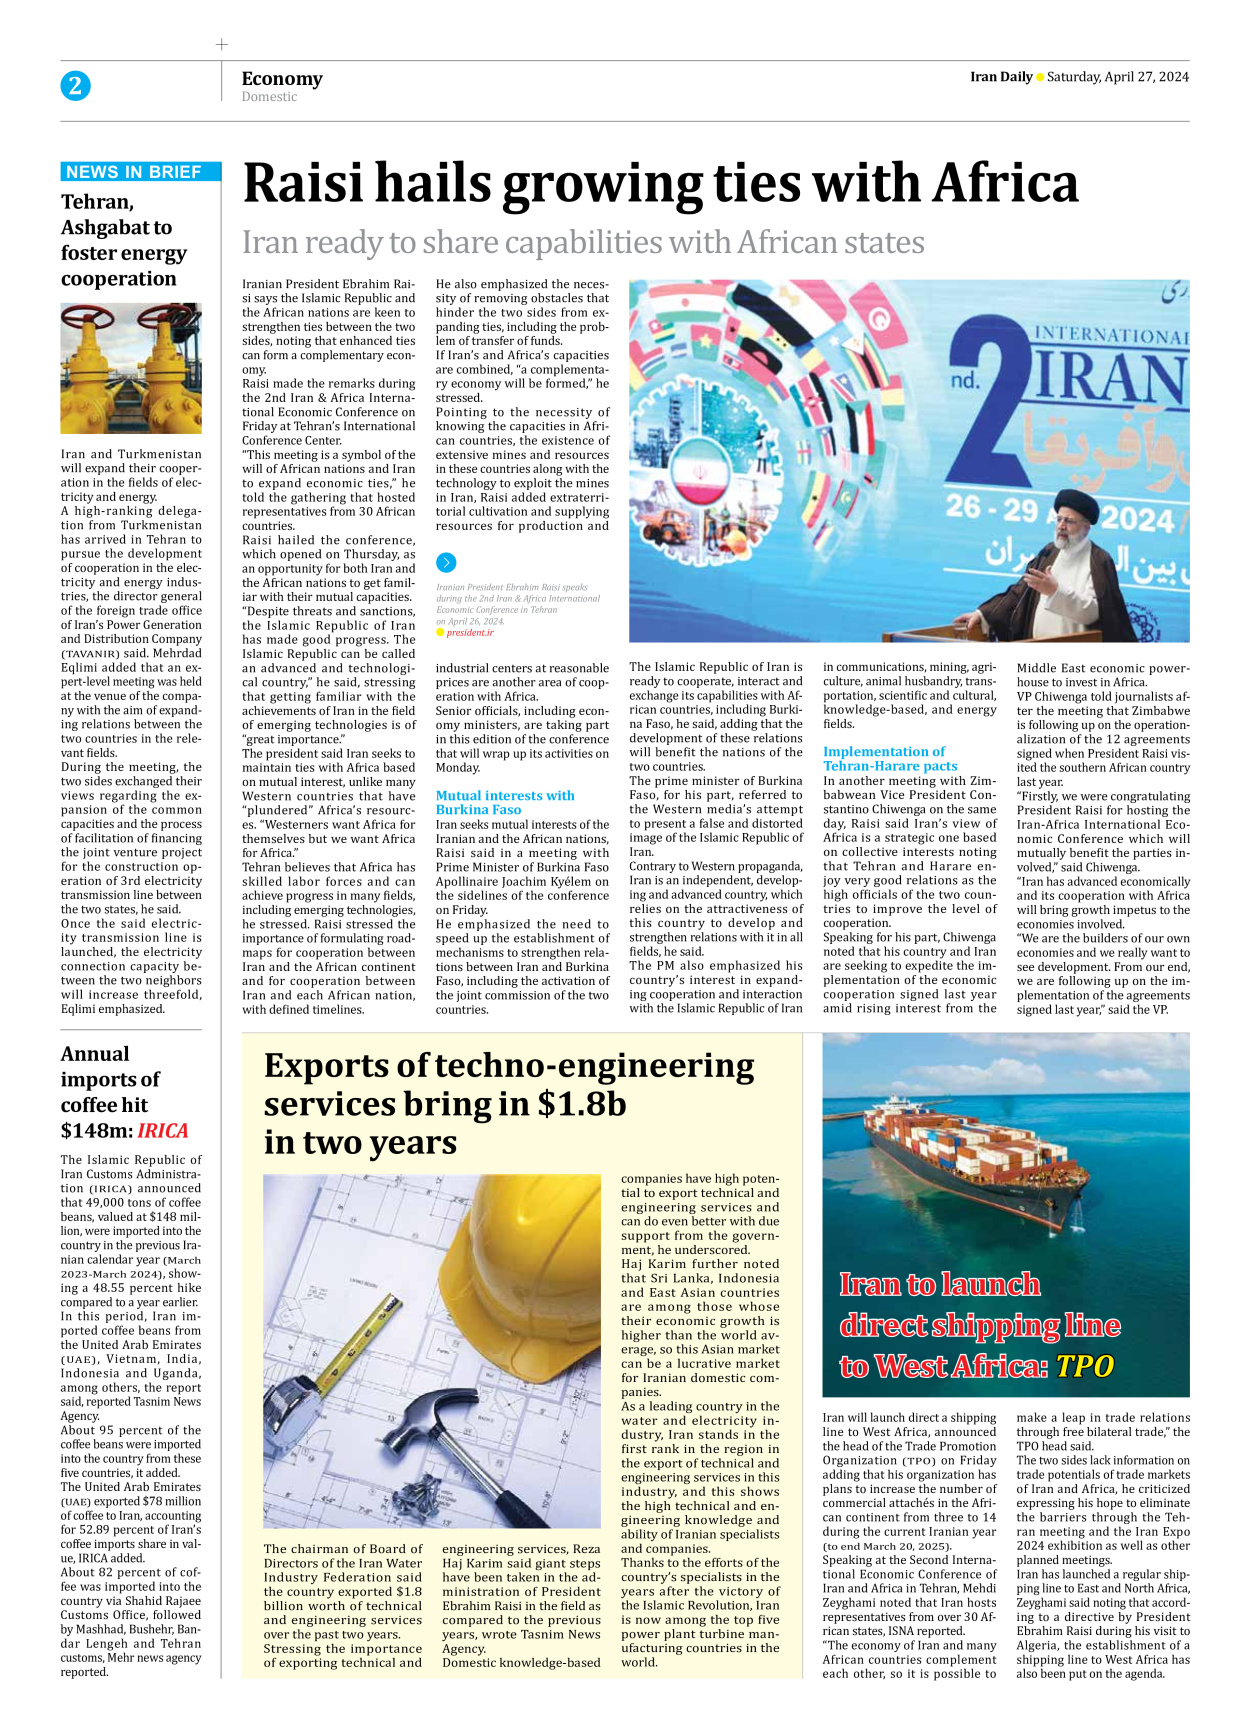 Iran Daily - Number Seven Thousand Five Hundred and Forty Three - 27 April 2024 - Page 2